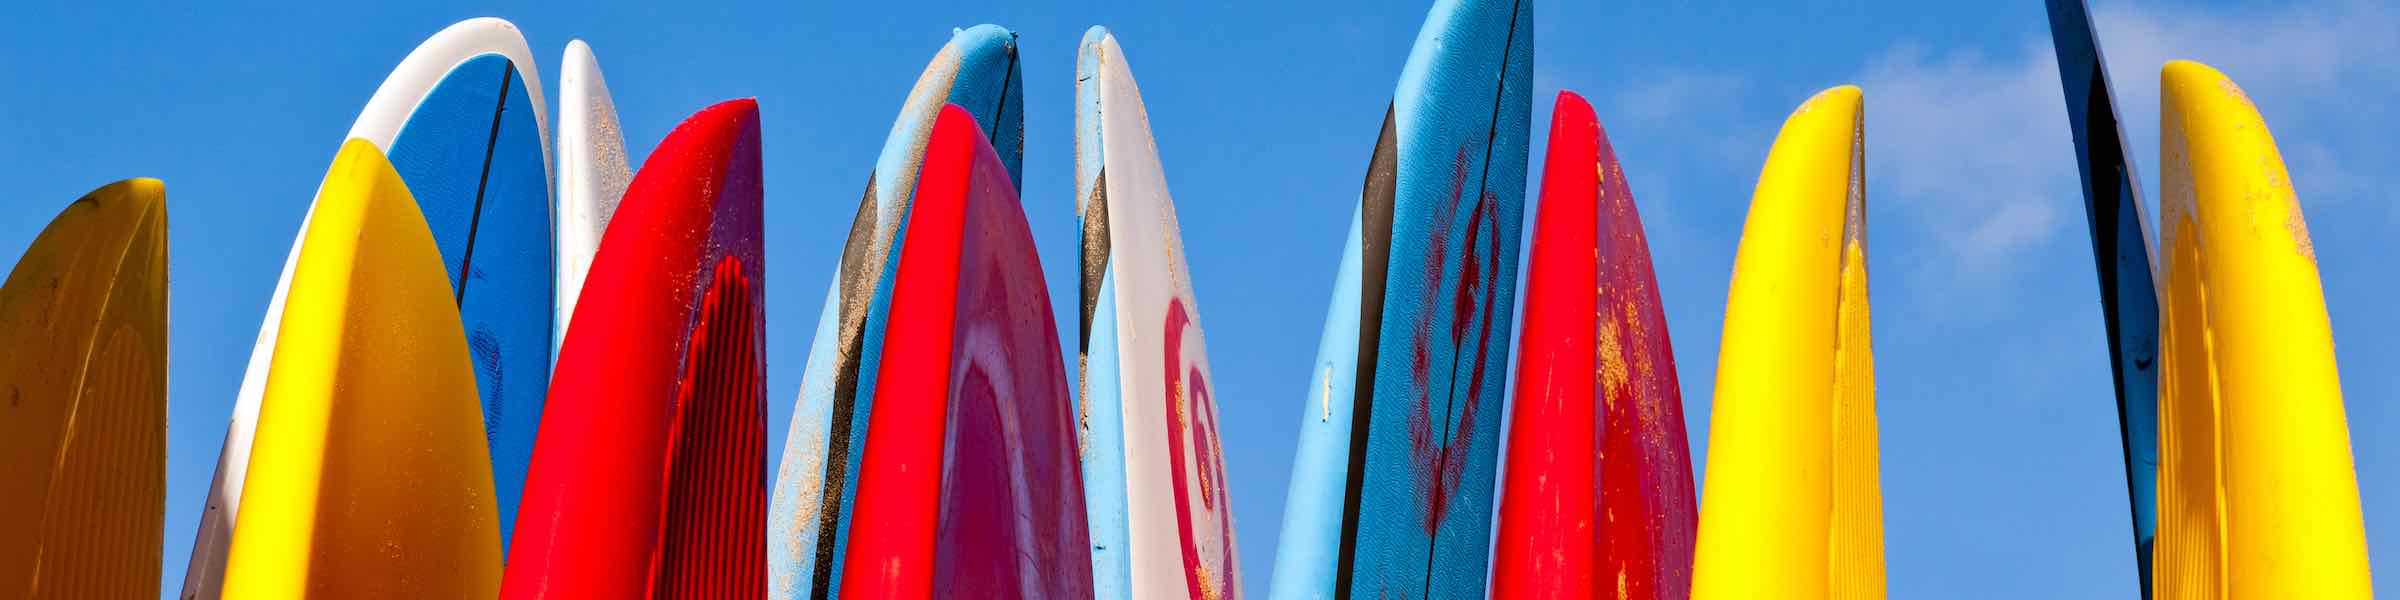 Tops of a row of colorful upright surfboards against a bright ble sky.